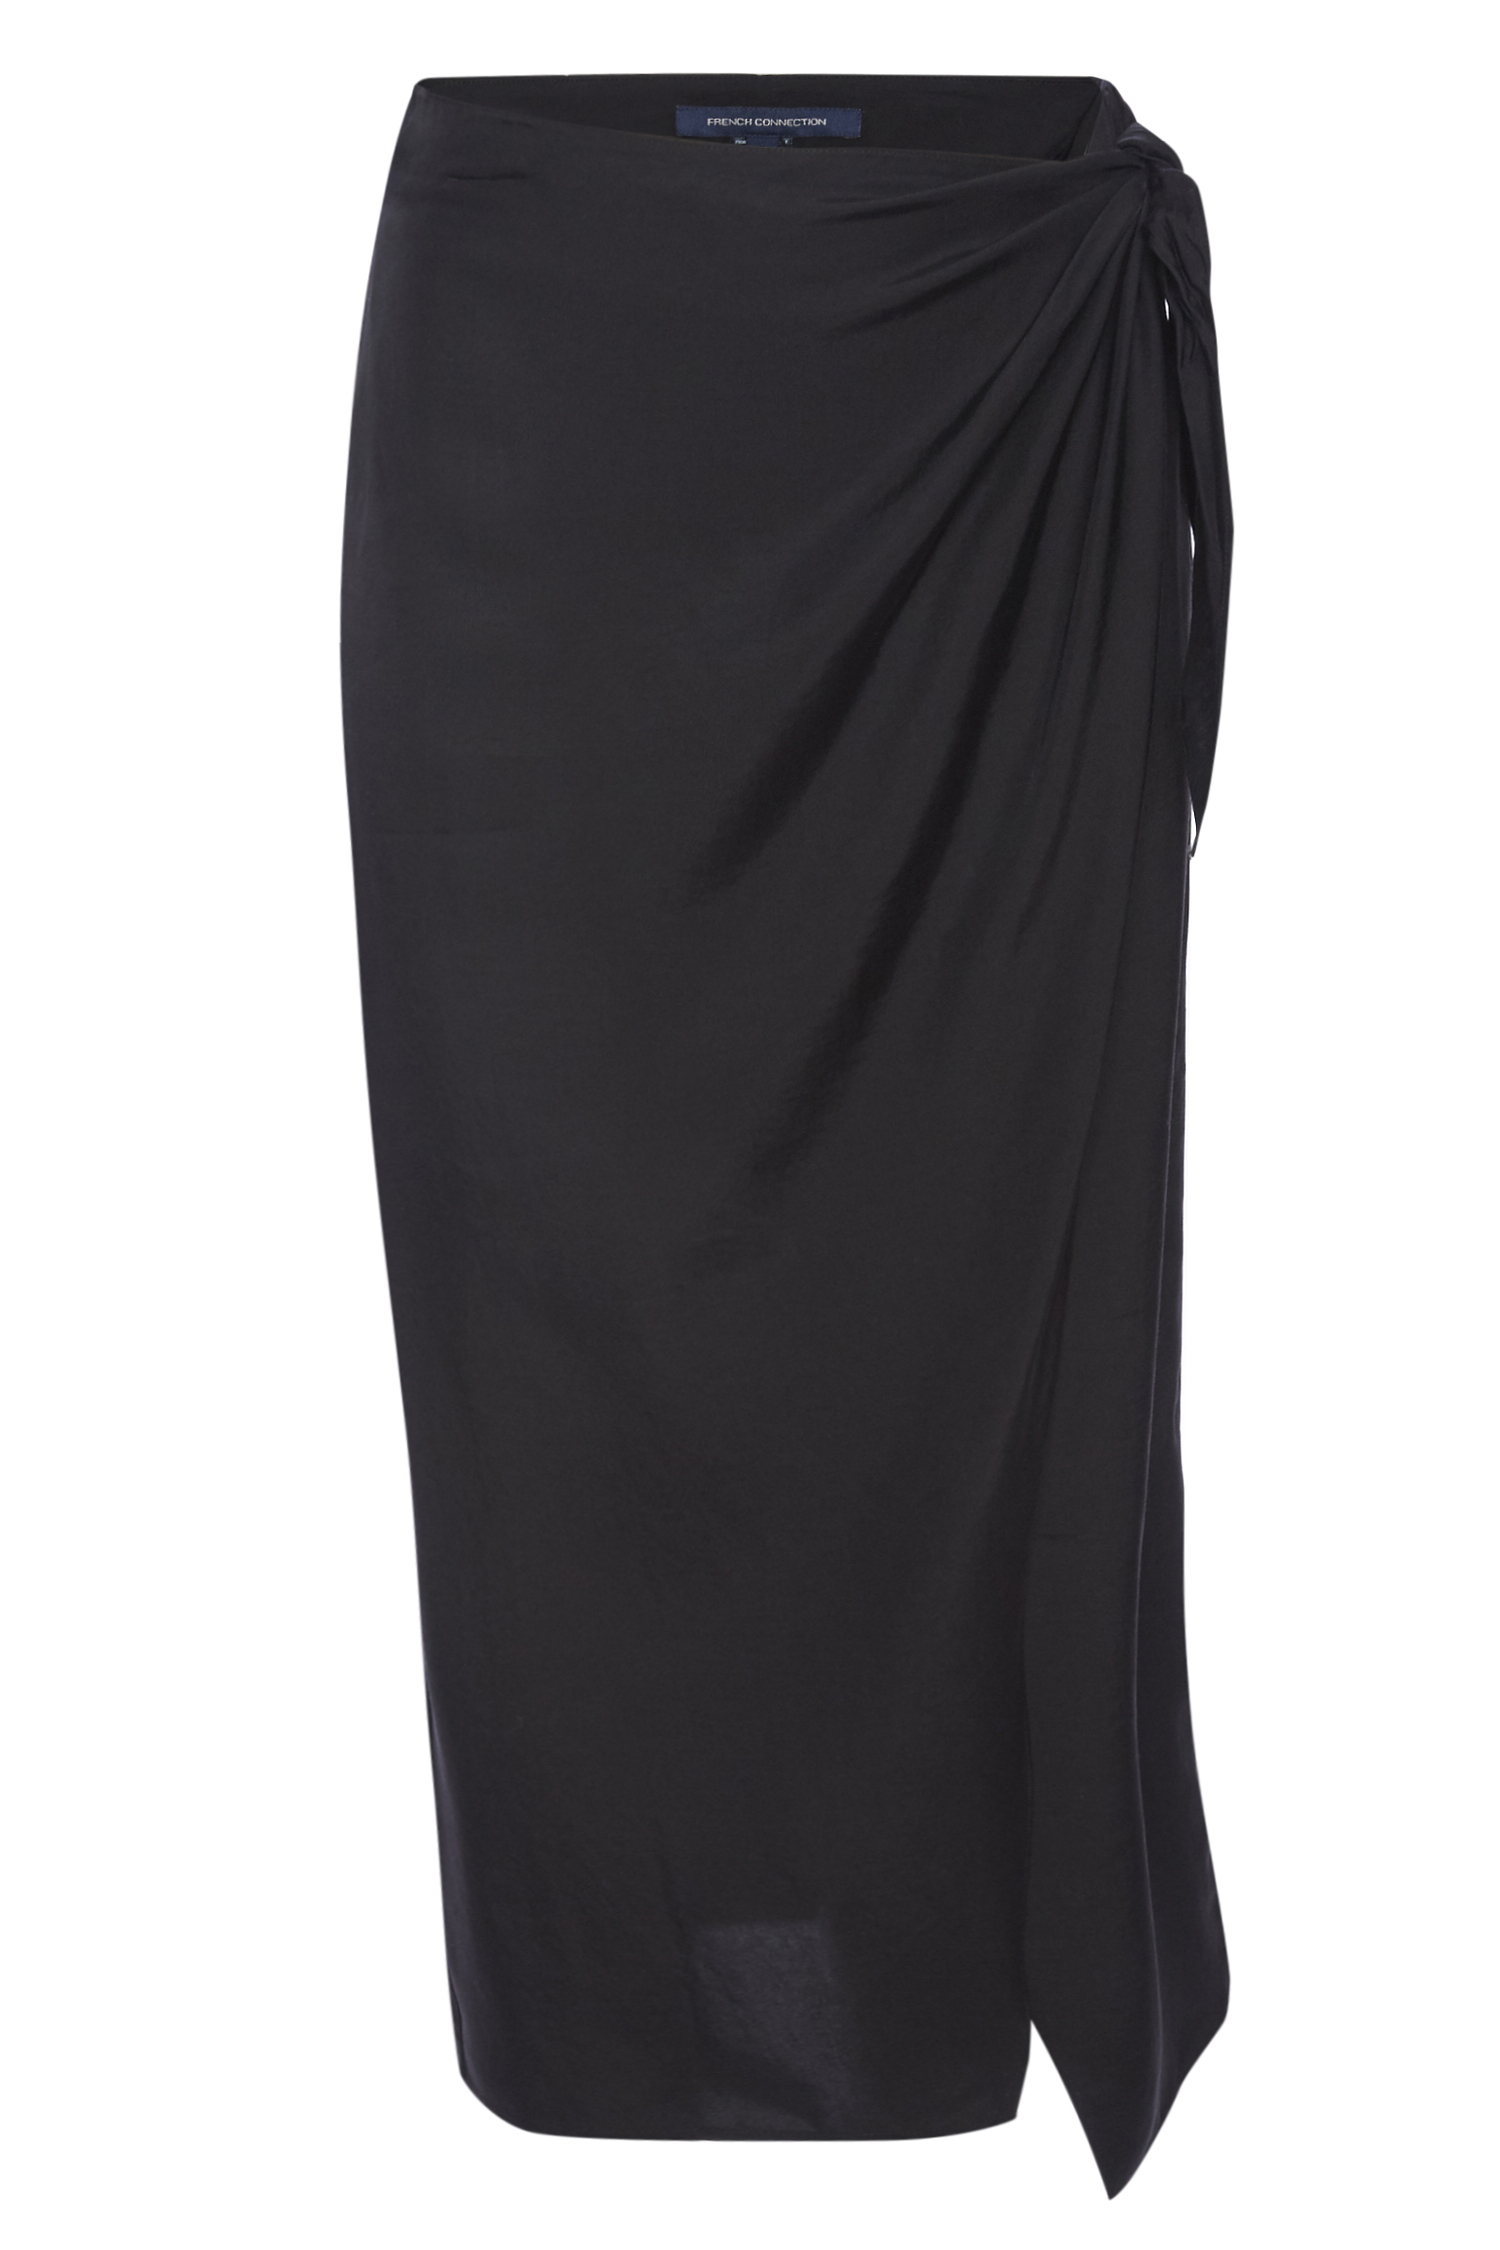 French Connection Drape Wrap Skirt